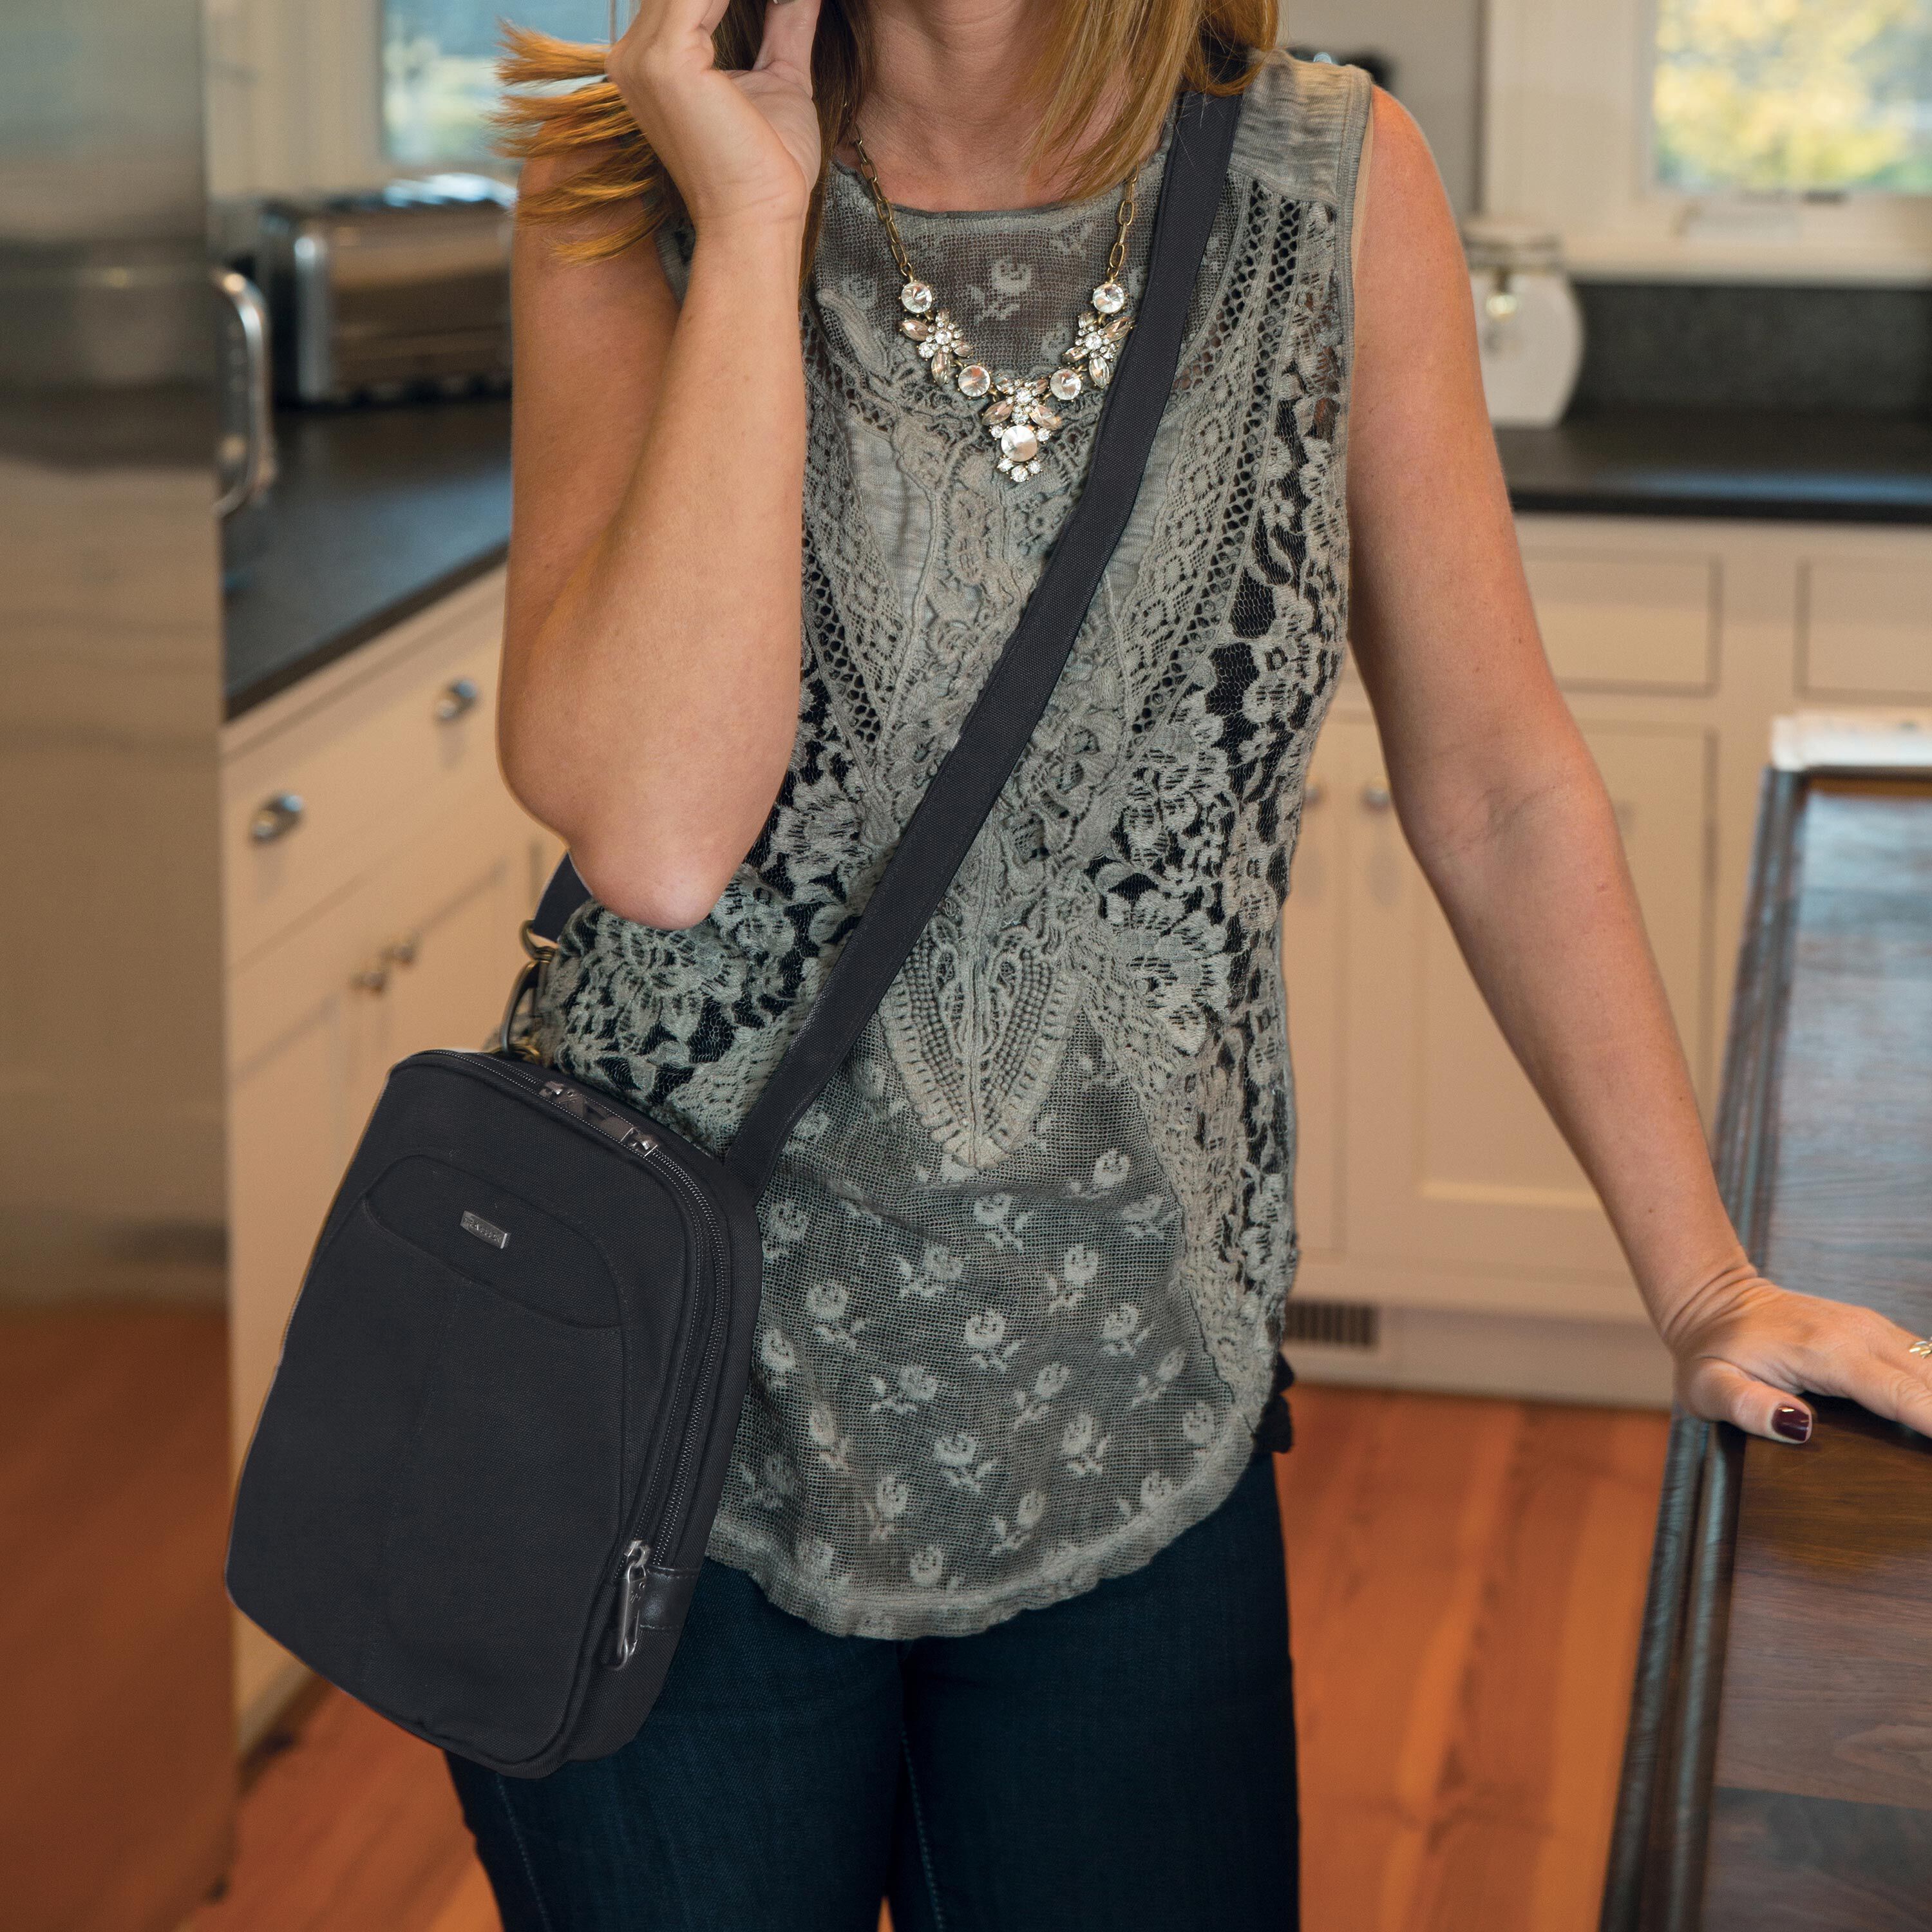 Anti-Theft Concealed Carry Slim Bag